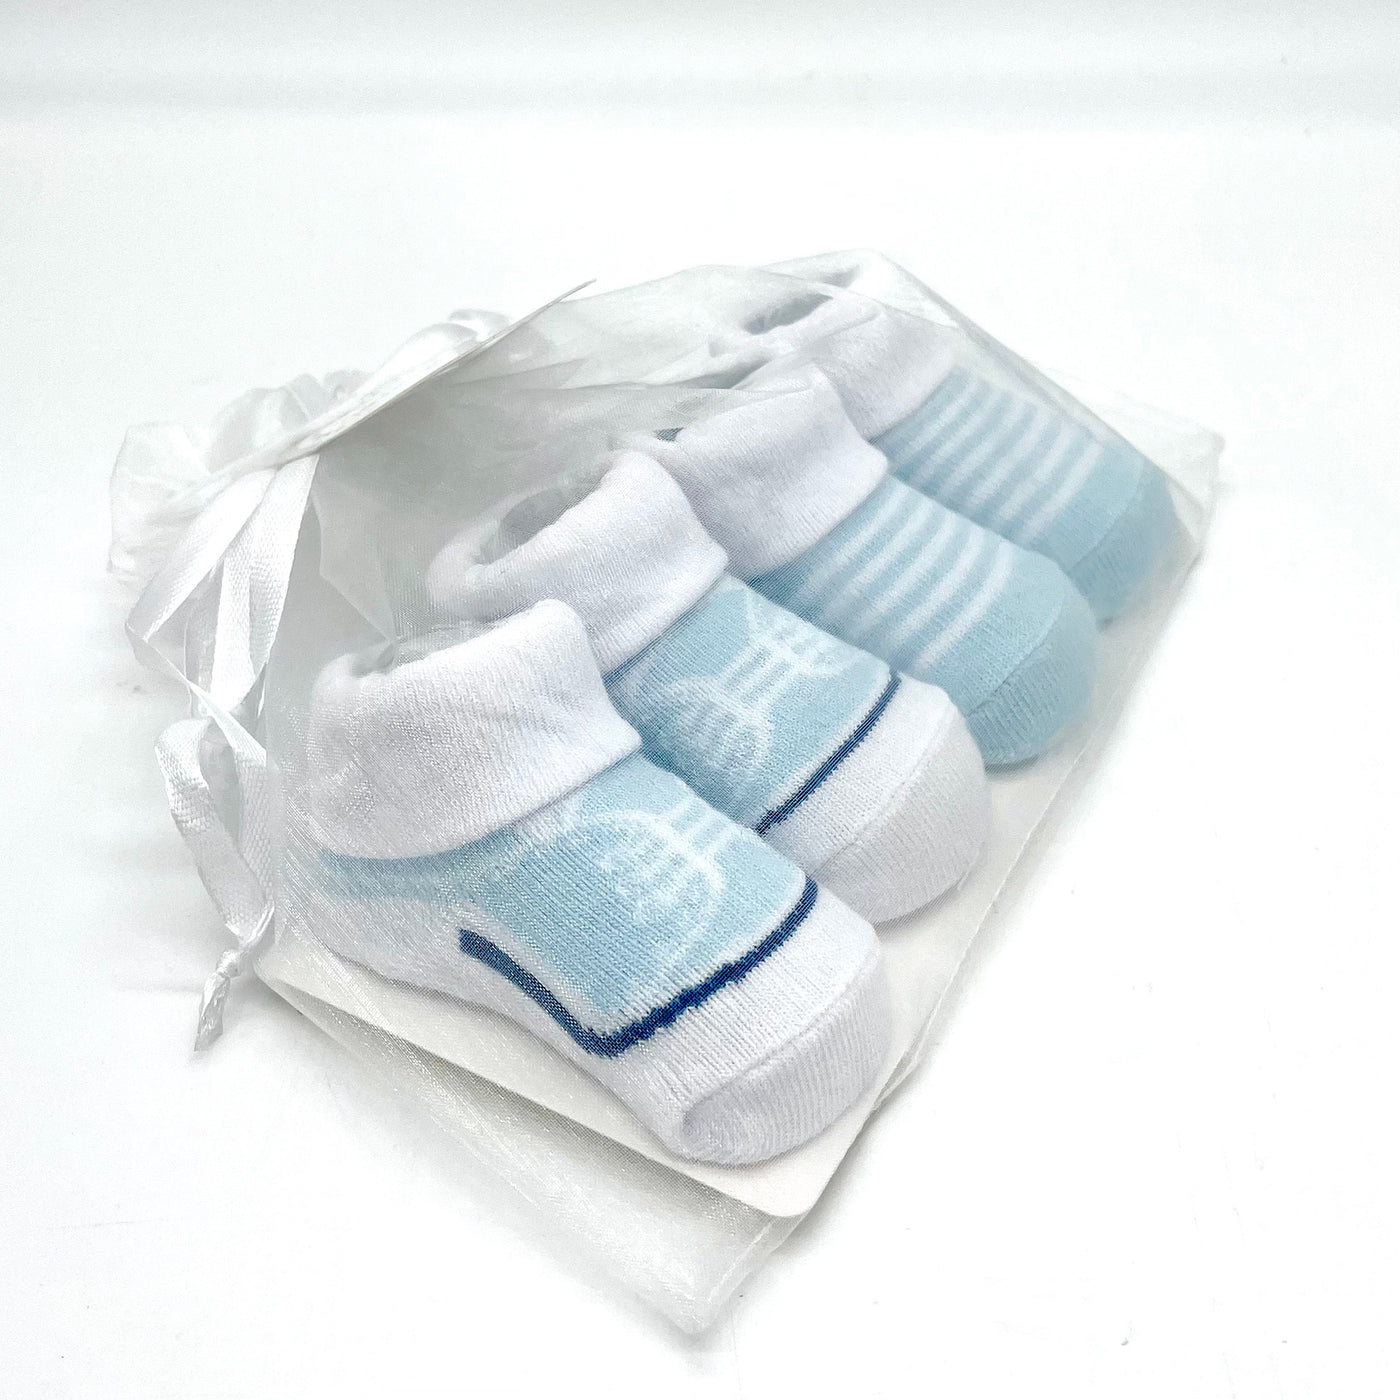 Two Sets of Blue and White Infant Socks